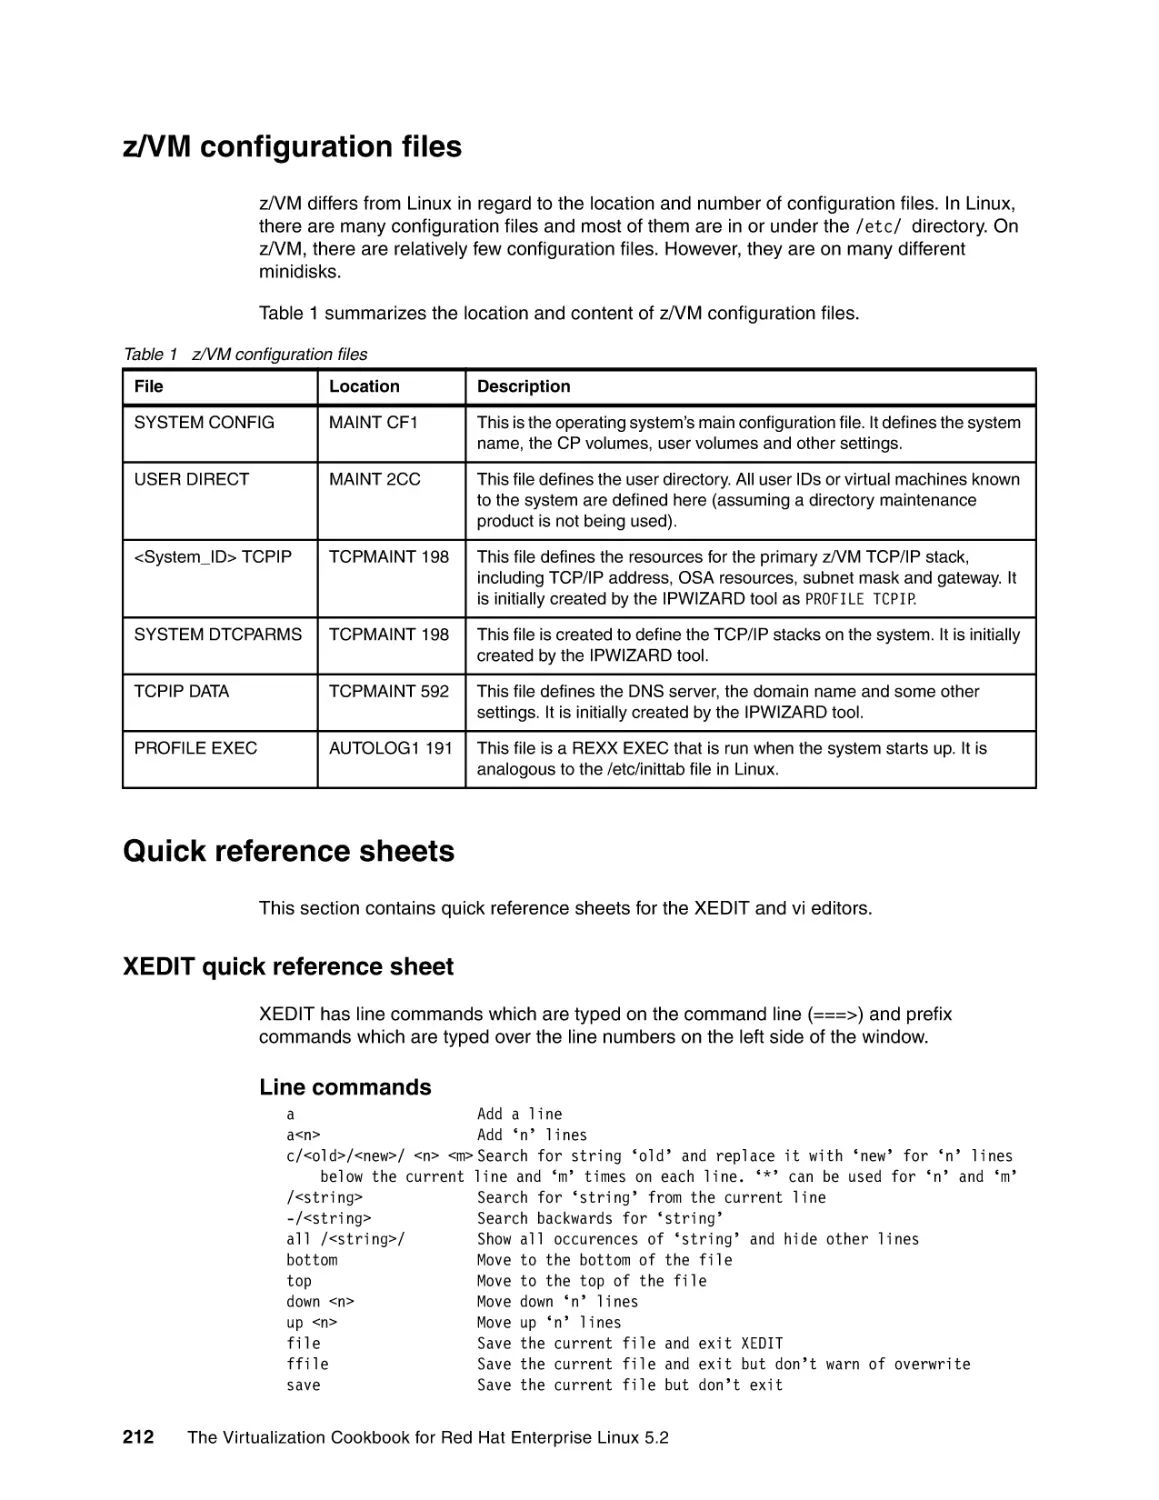 z/VM configuration files
Quick reference sheets
XEDIT quick reference sheet